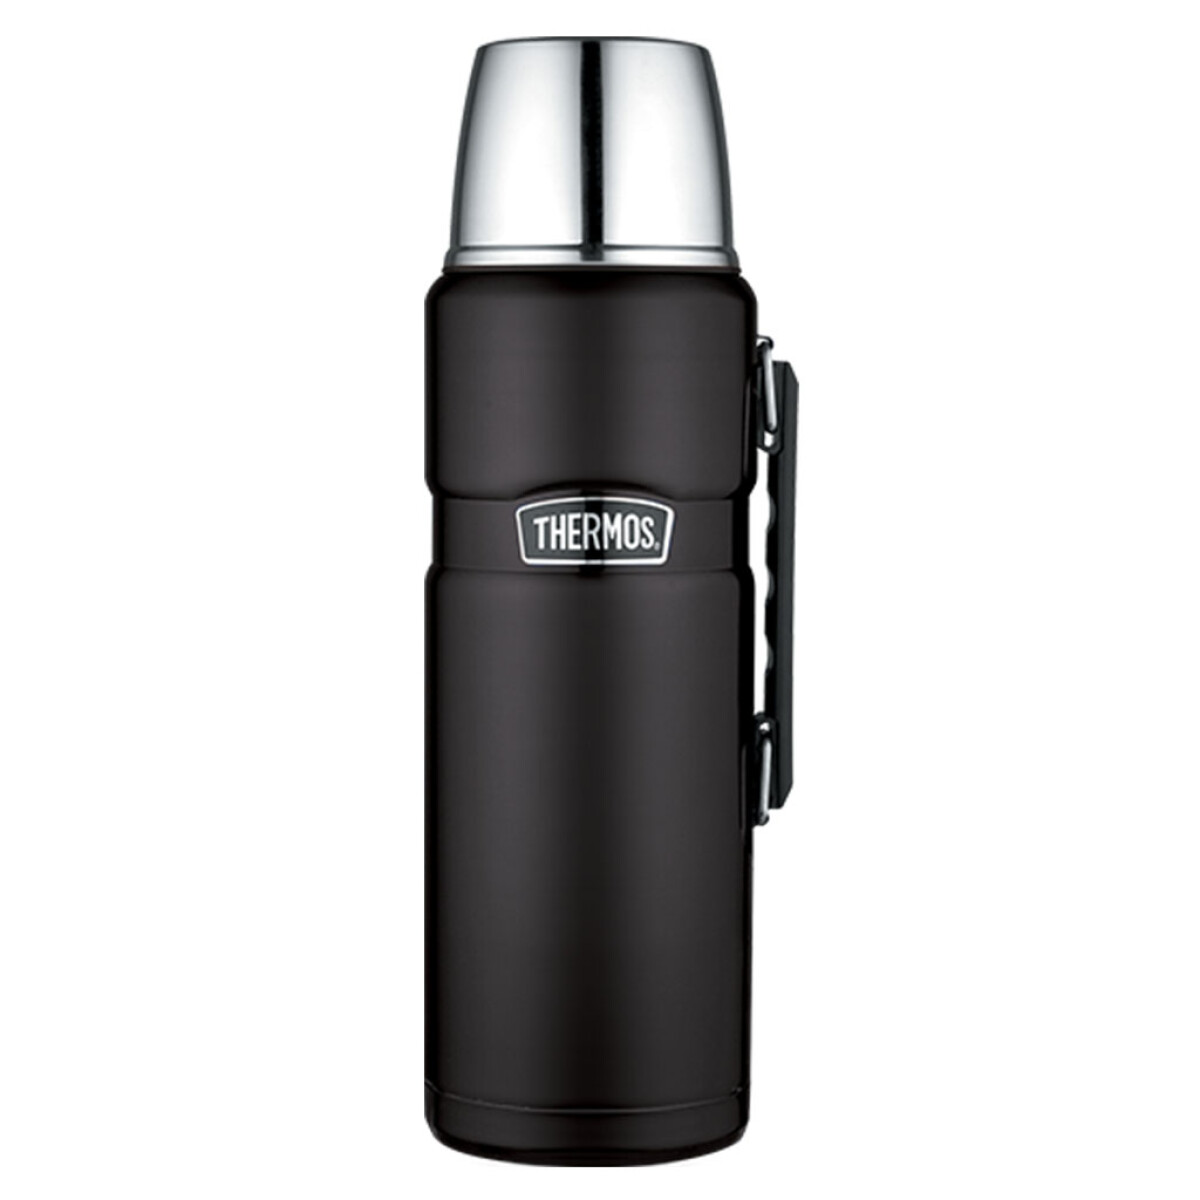 TERMO 1.2L STAINLESS KING ACERO INOXIDABLE NEGROMAT THERMOS 